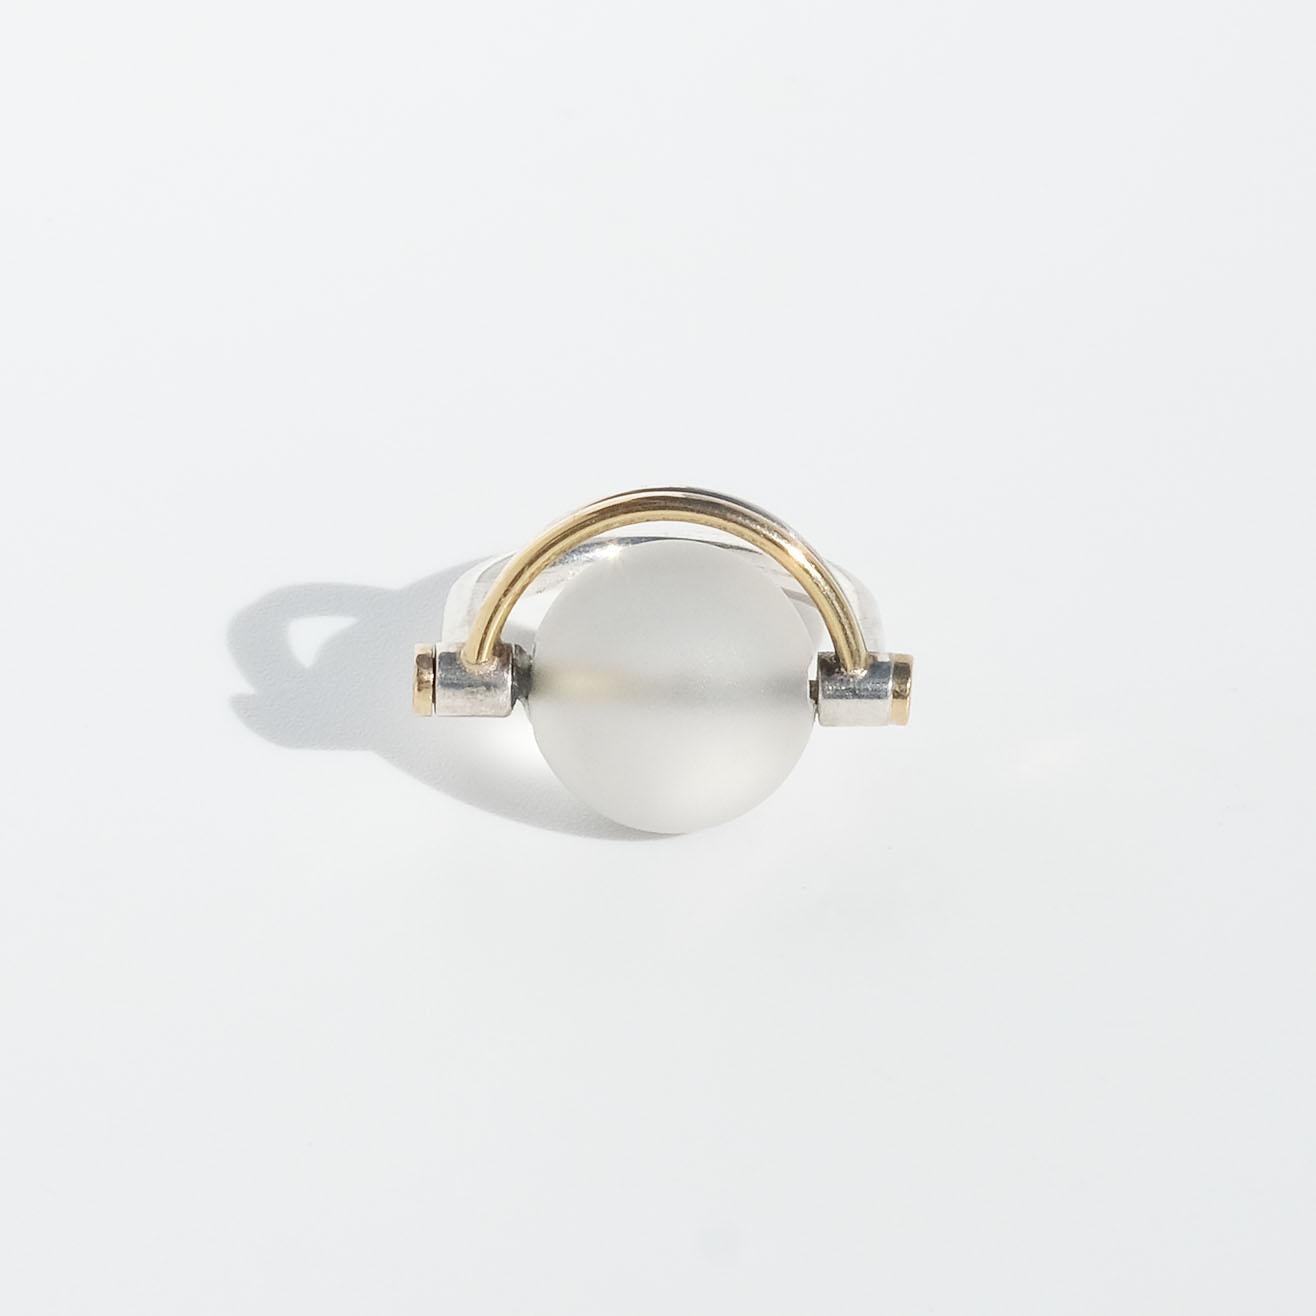 This silver ring is adorned with a frosted rock crystal ball which is surrounded by two parallel semi-circles, one in silver and the other in gilt silver. The semi-circles have prominent mounts and the u-shaped shank is rounded in itself.

Like the